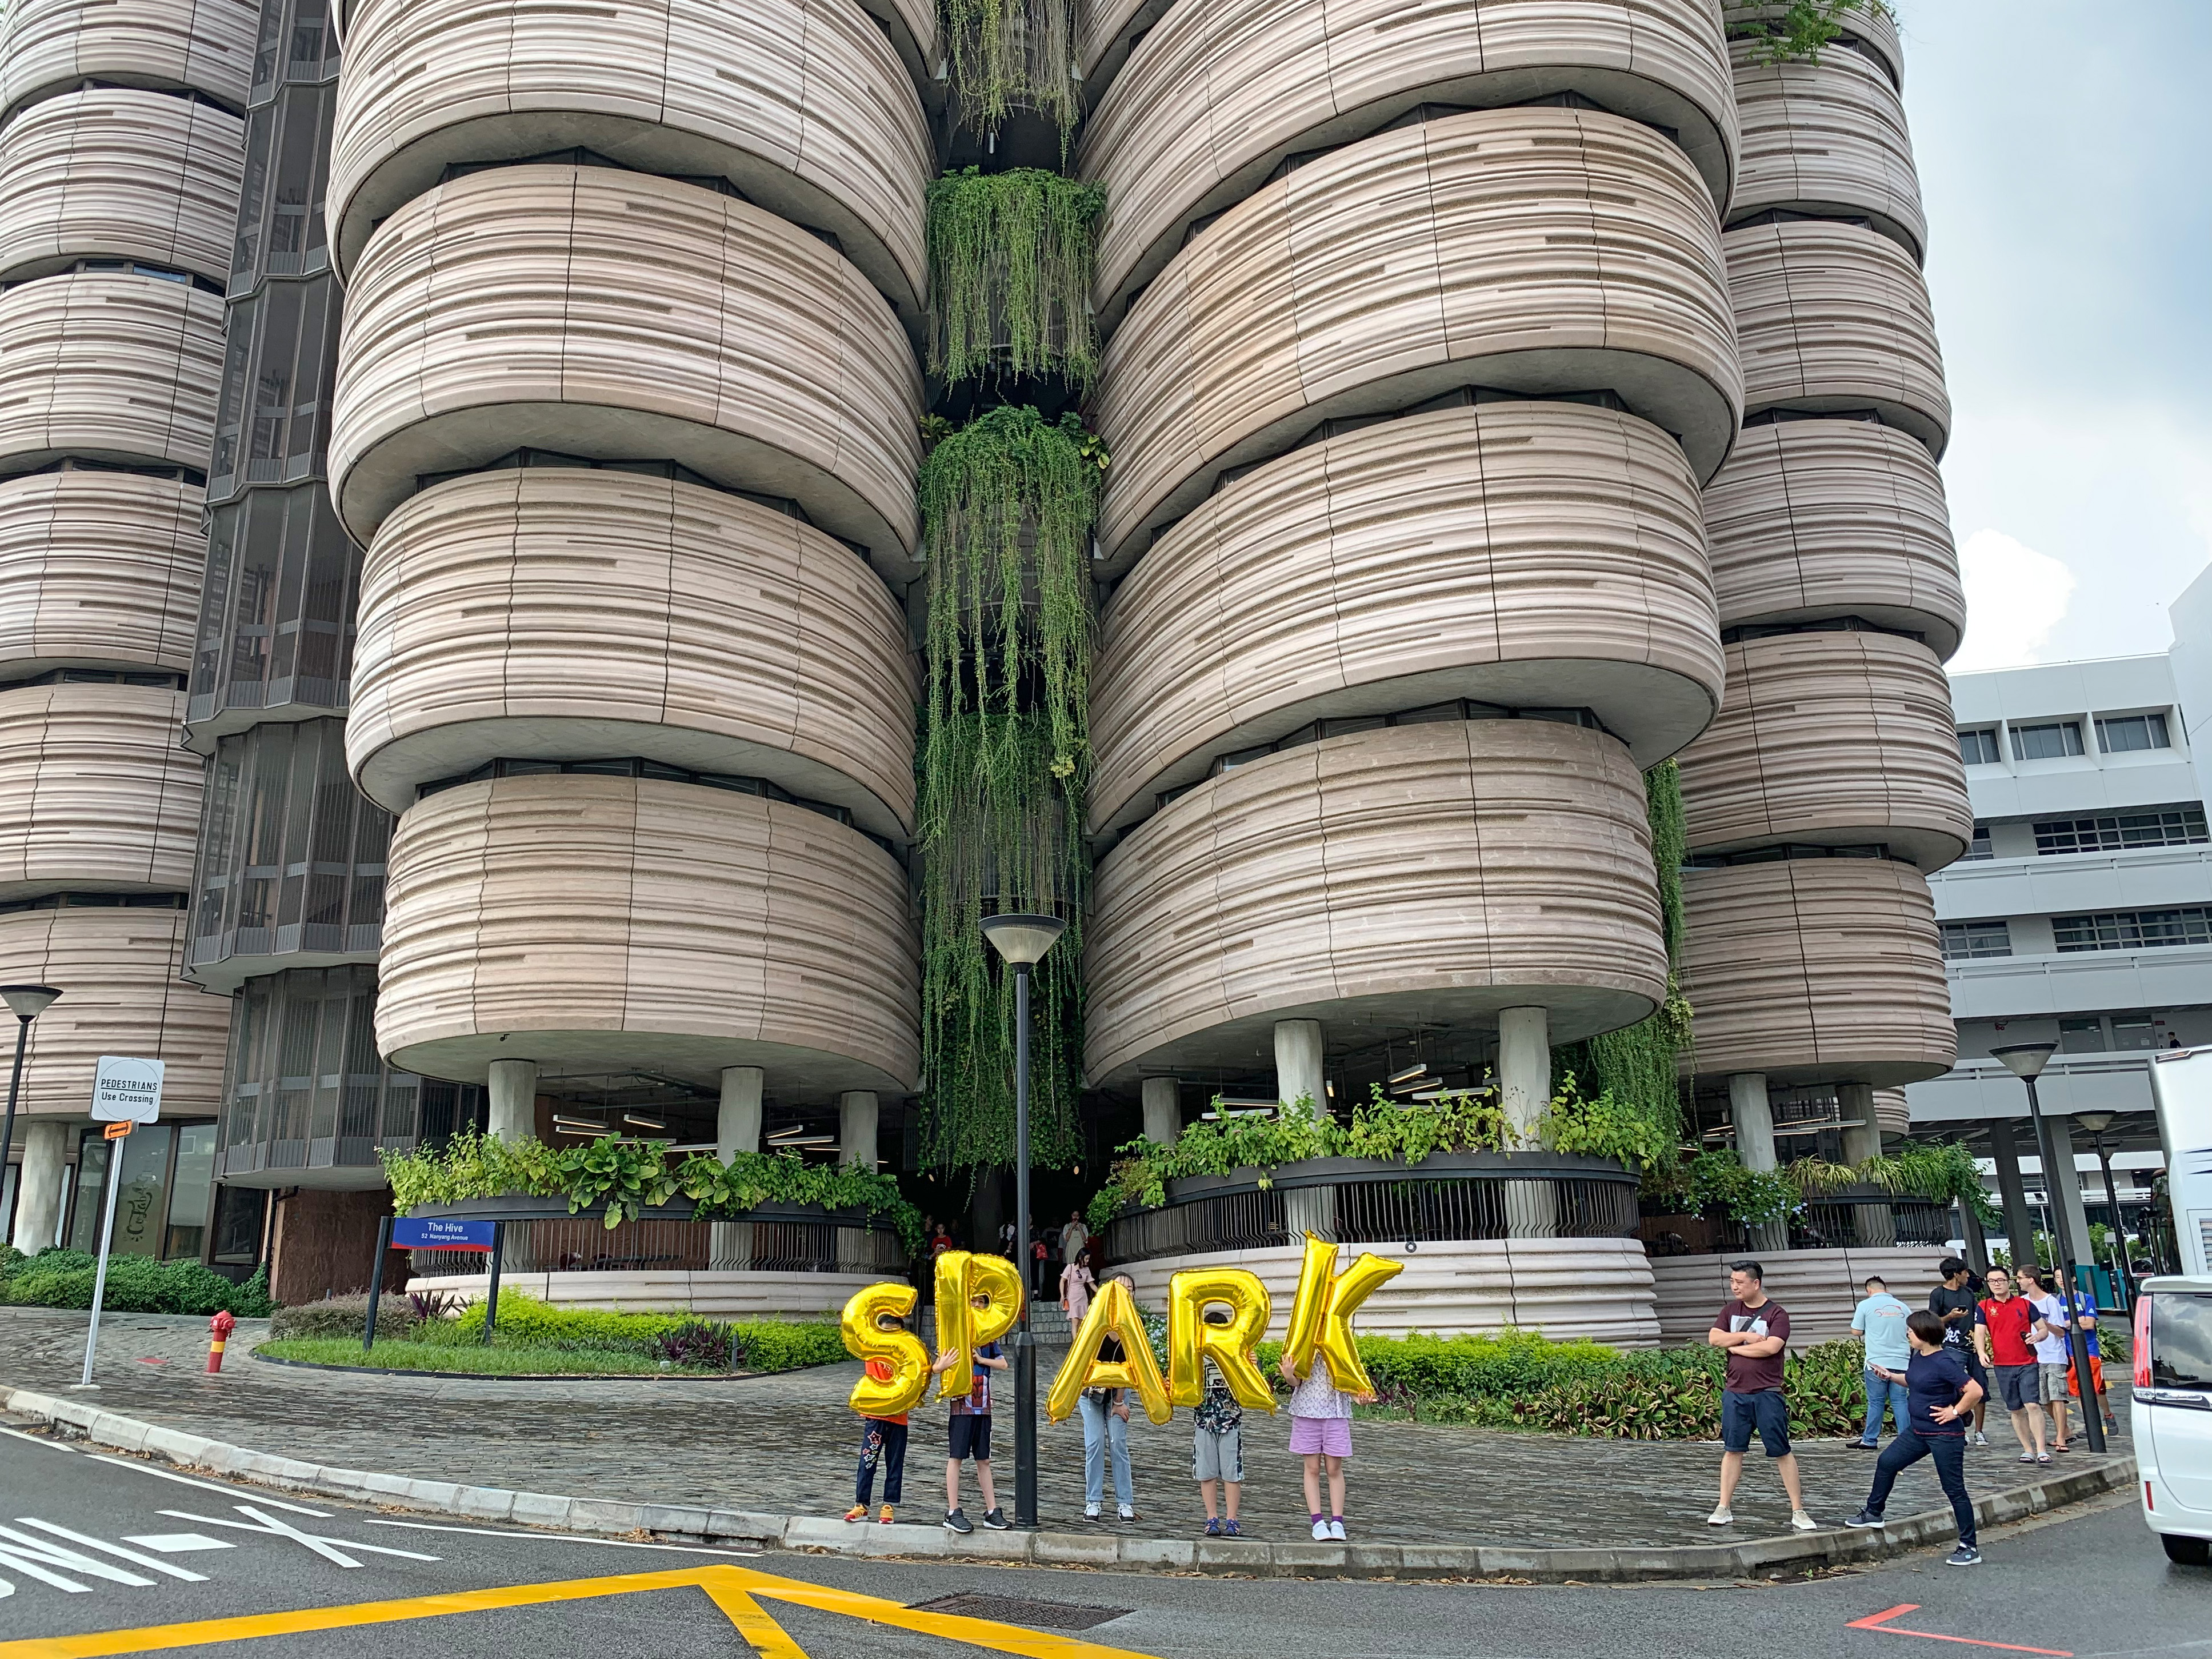 Singapore, The Hive (Nanyang Technological University) - Spark, Silence was Golden, gold balloons.